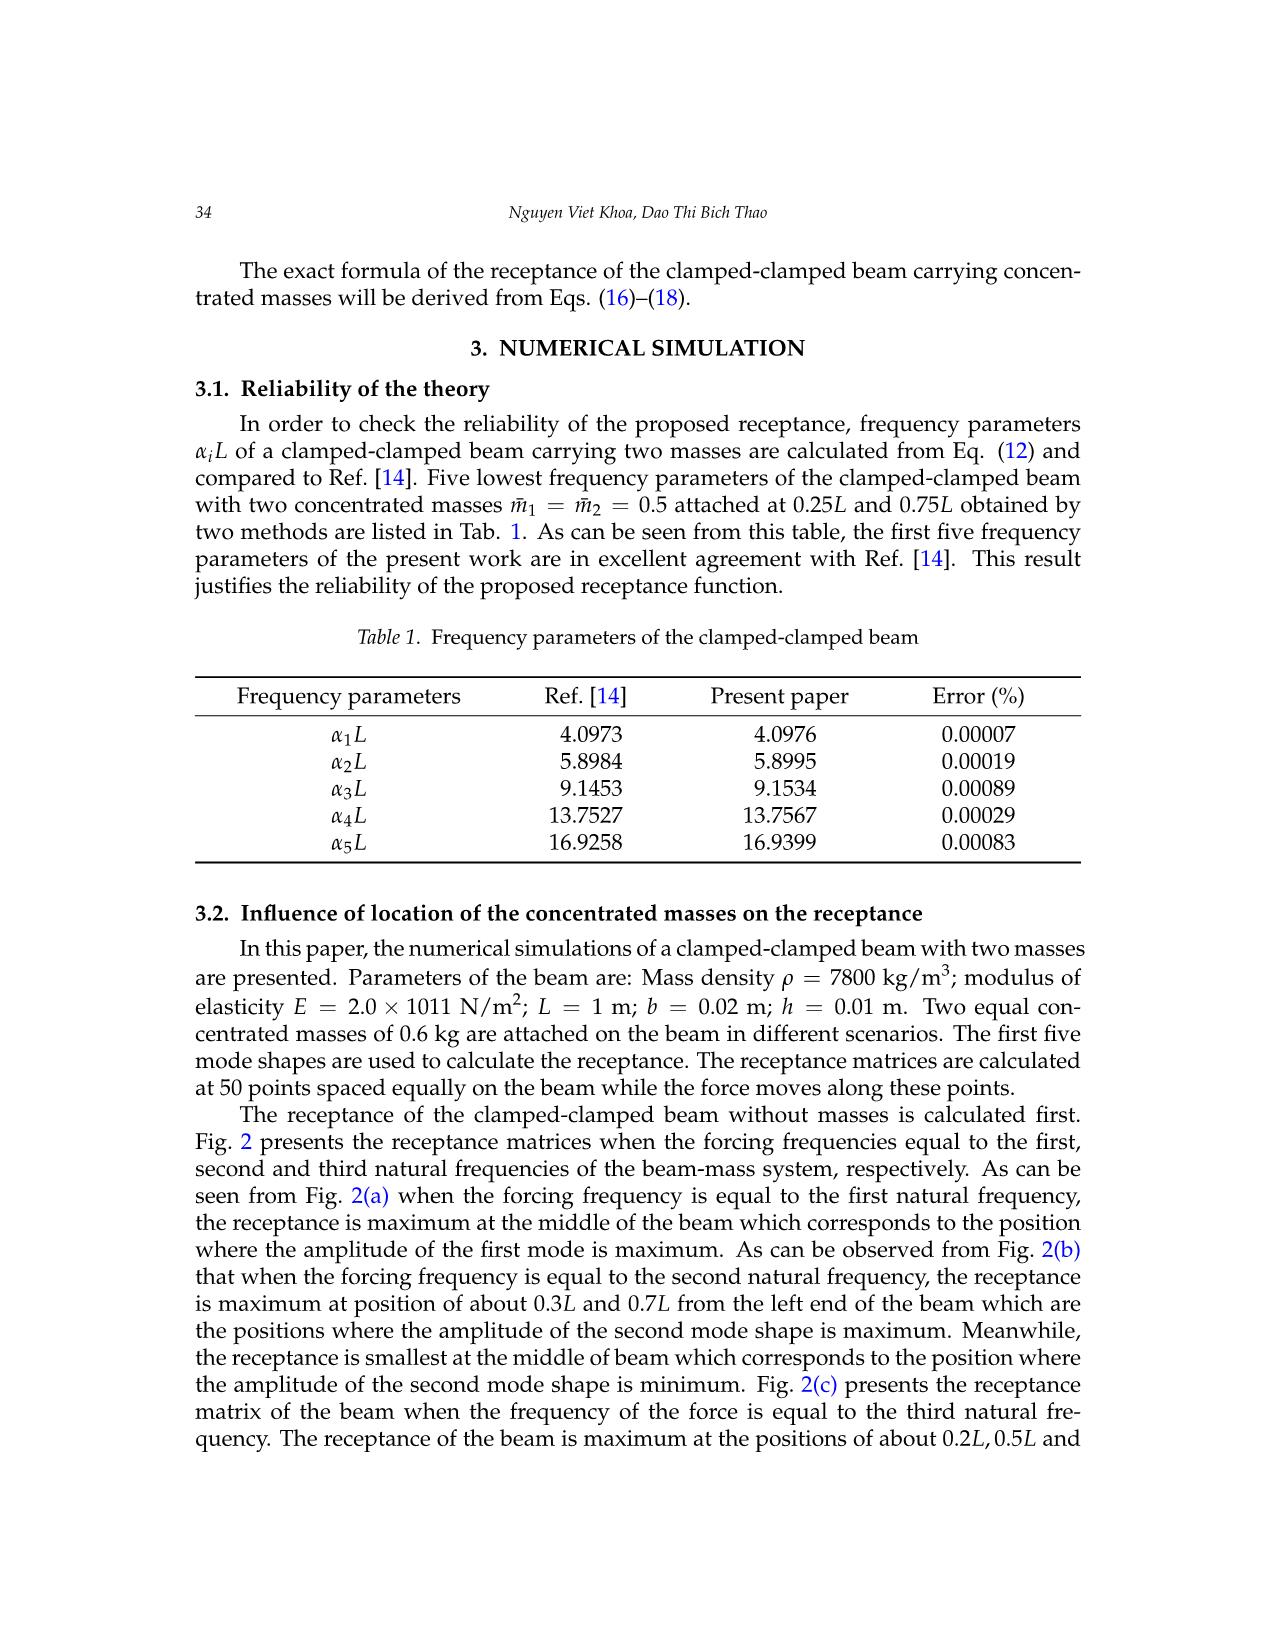 Theoretical and experimental analysis of the exact receptance function of a clamped - Clamped beam with concentrated masses trang 6